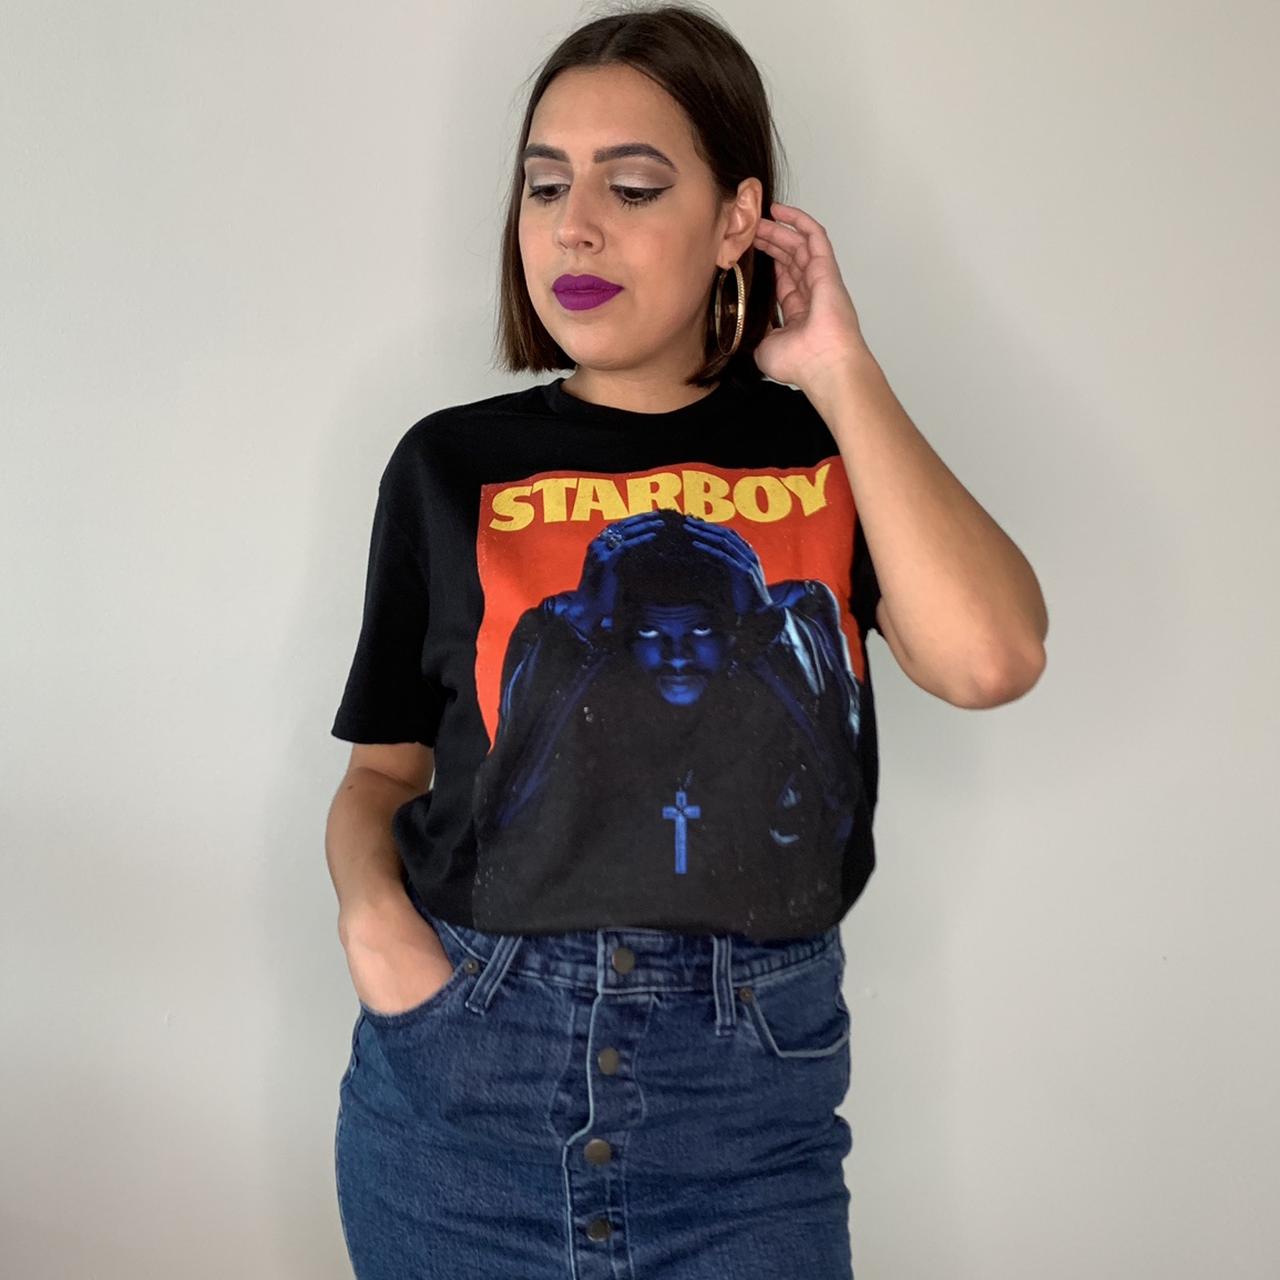 The Weeknd Starboy Hoodie For Women's Or Men's Hot Topic Shirts